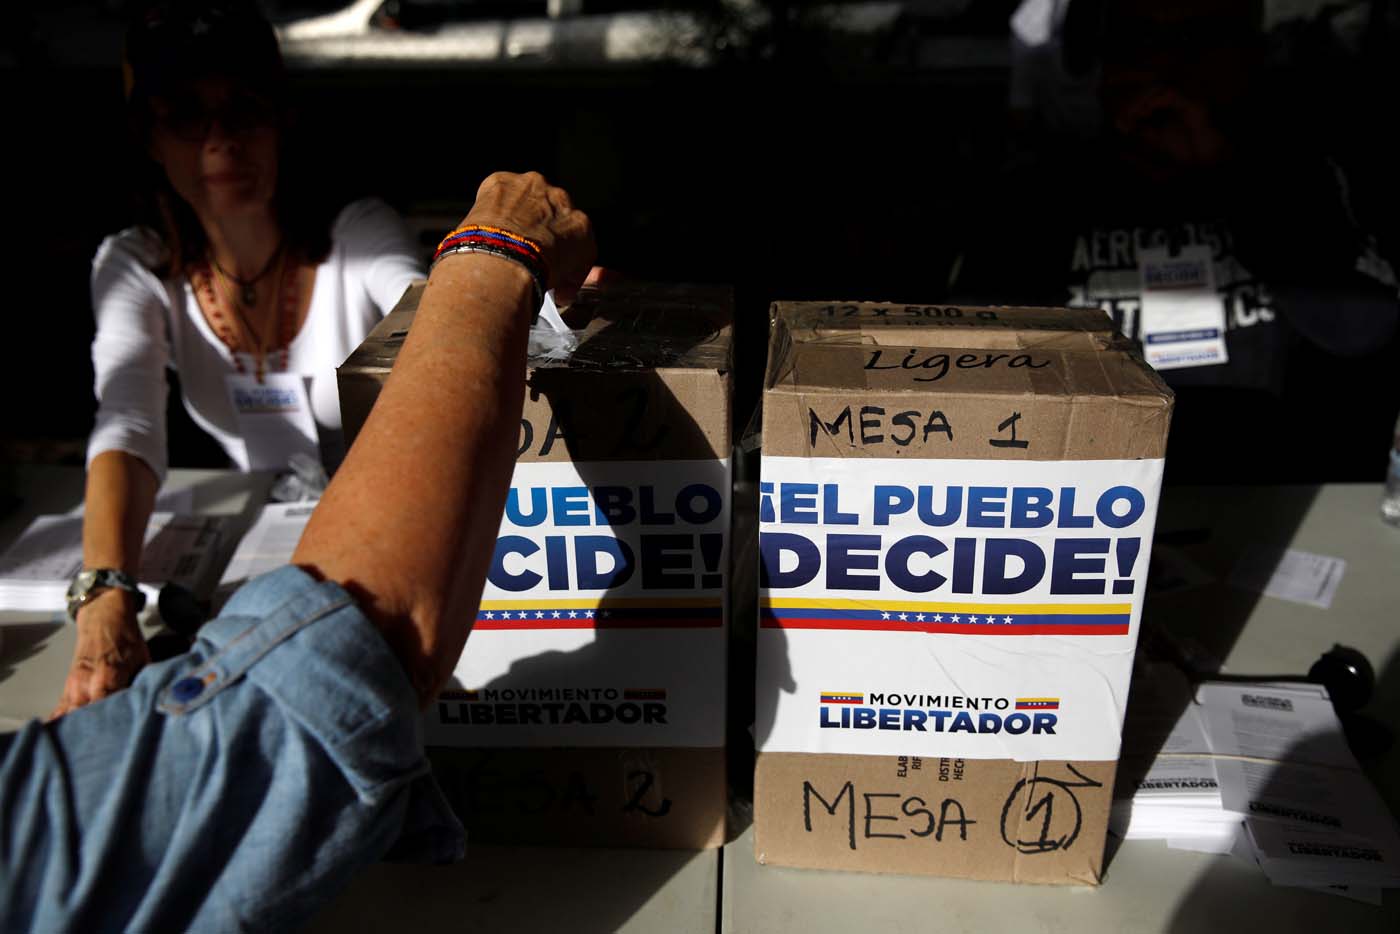 A person votes during an unofficial plebiscite against Venezuela's President Nicolas Maduro's government and his plan to rewrite the constitution, in Caracas, Venezuela July 16, 2017. The writing on the boxes read "The people decide, Liberator Movement." REUTERS/Carlos Garcia Rawlins